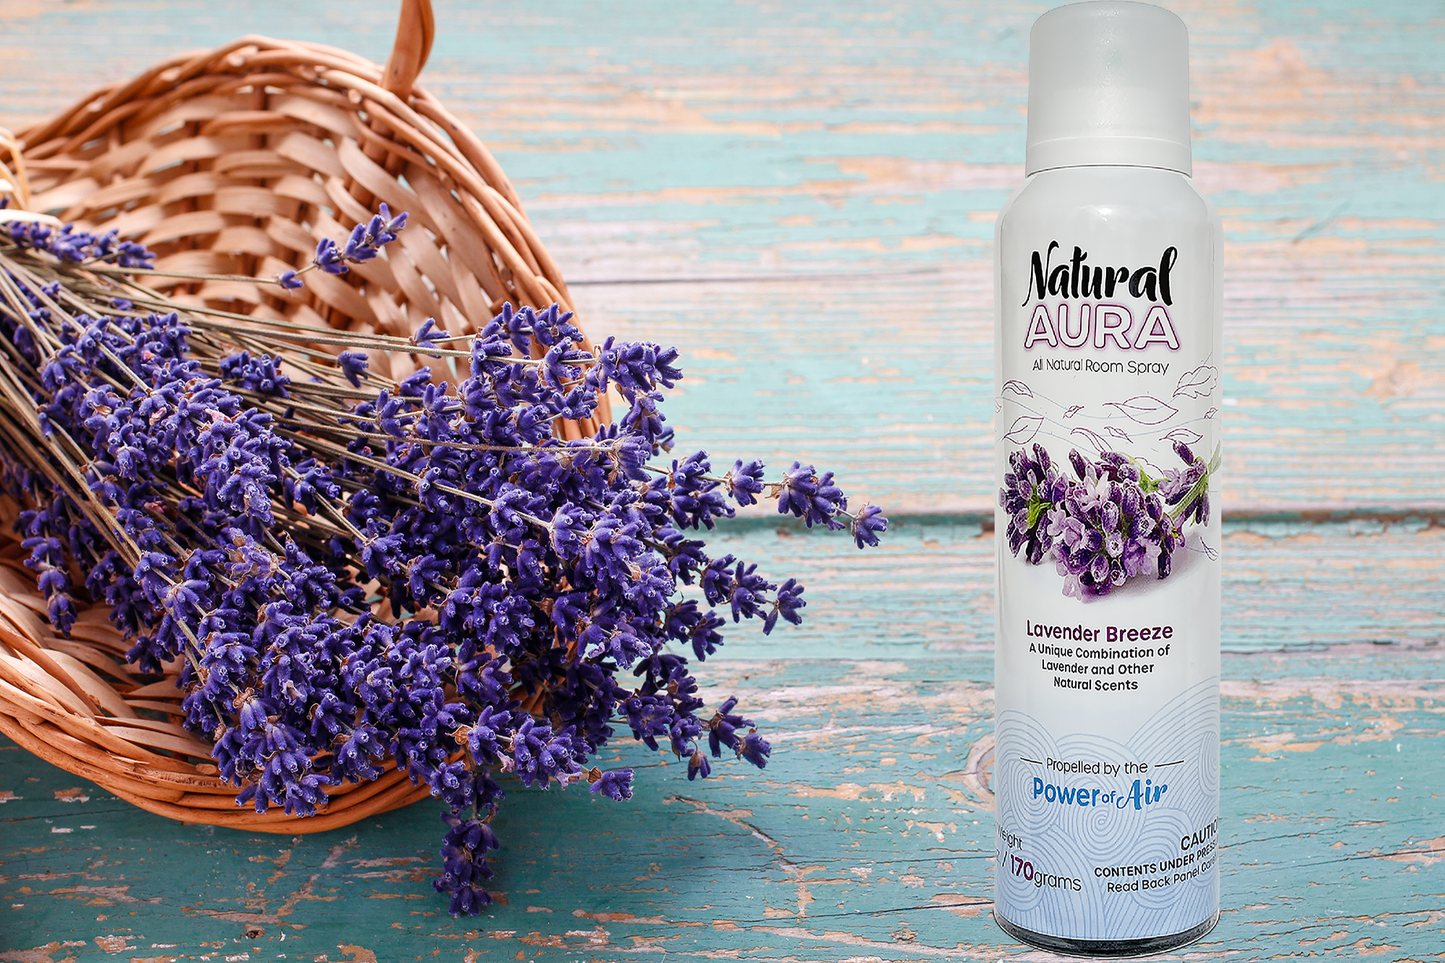 Bottle of Natura Aura Lavender Breeze Room Spray sitting on a wooden table with cracking teal paint along with a wicker basket containing purple lavender branches.